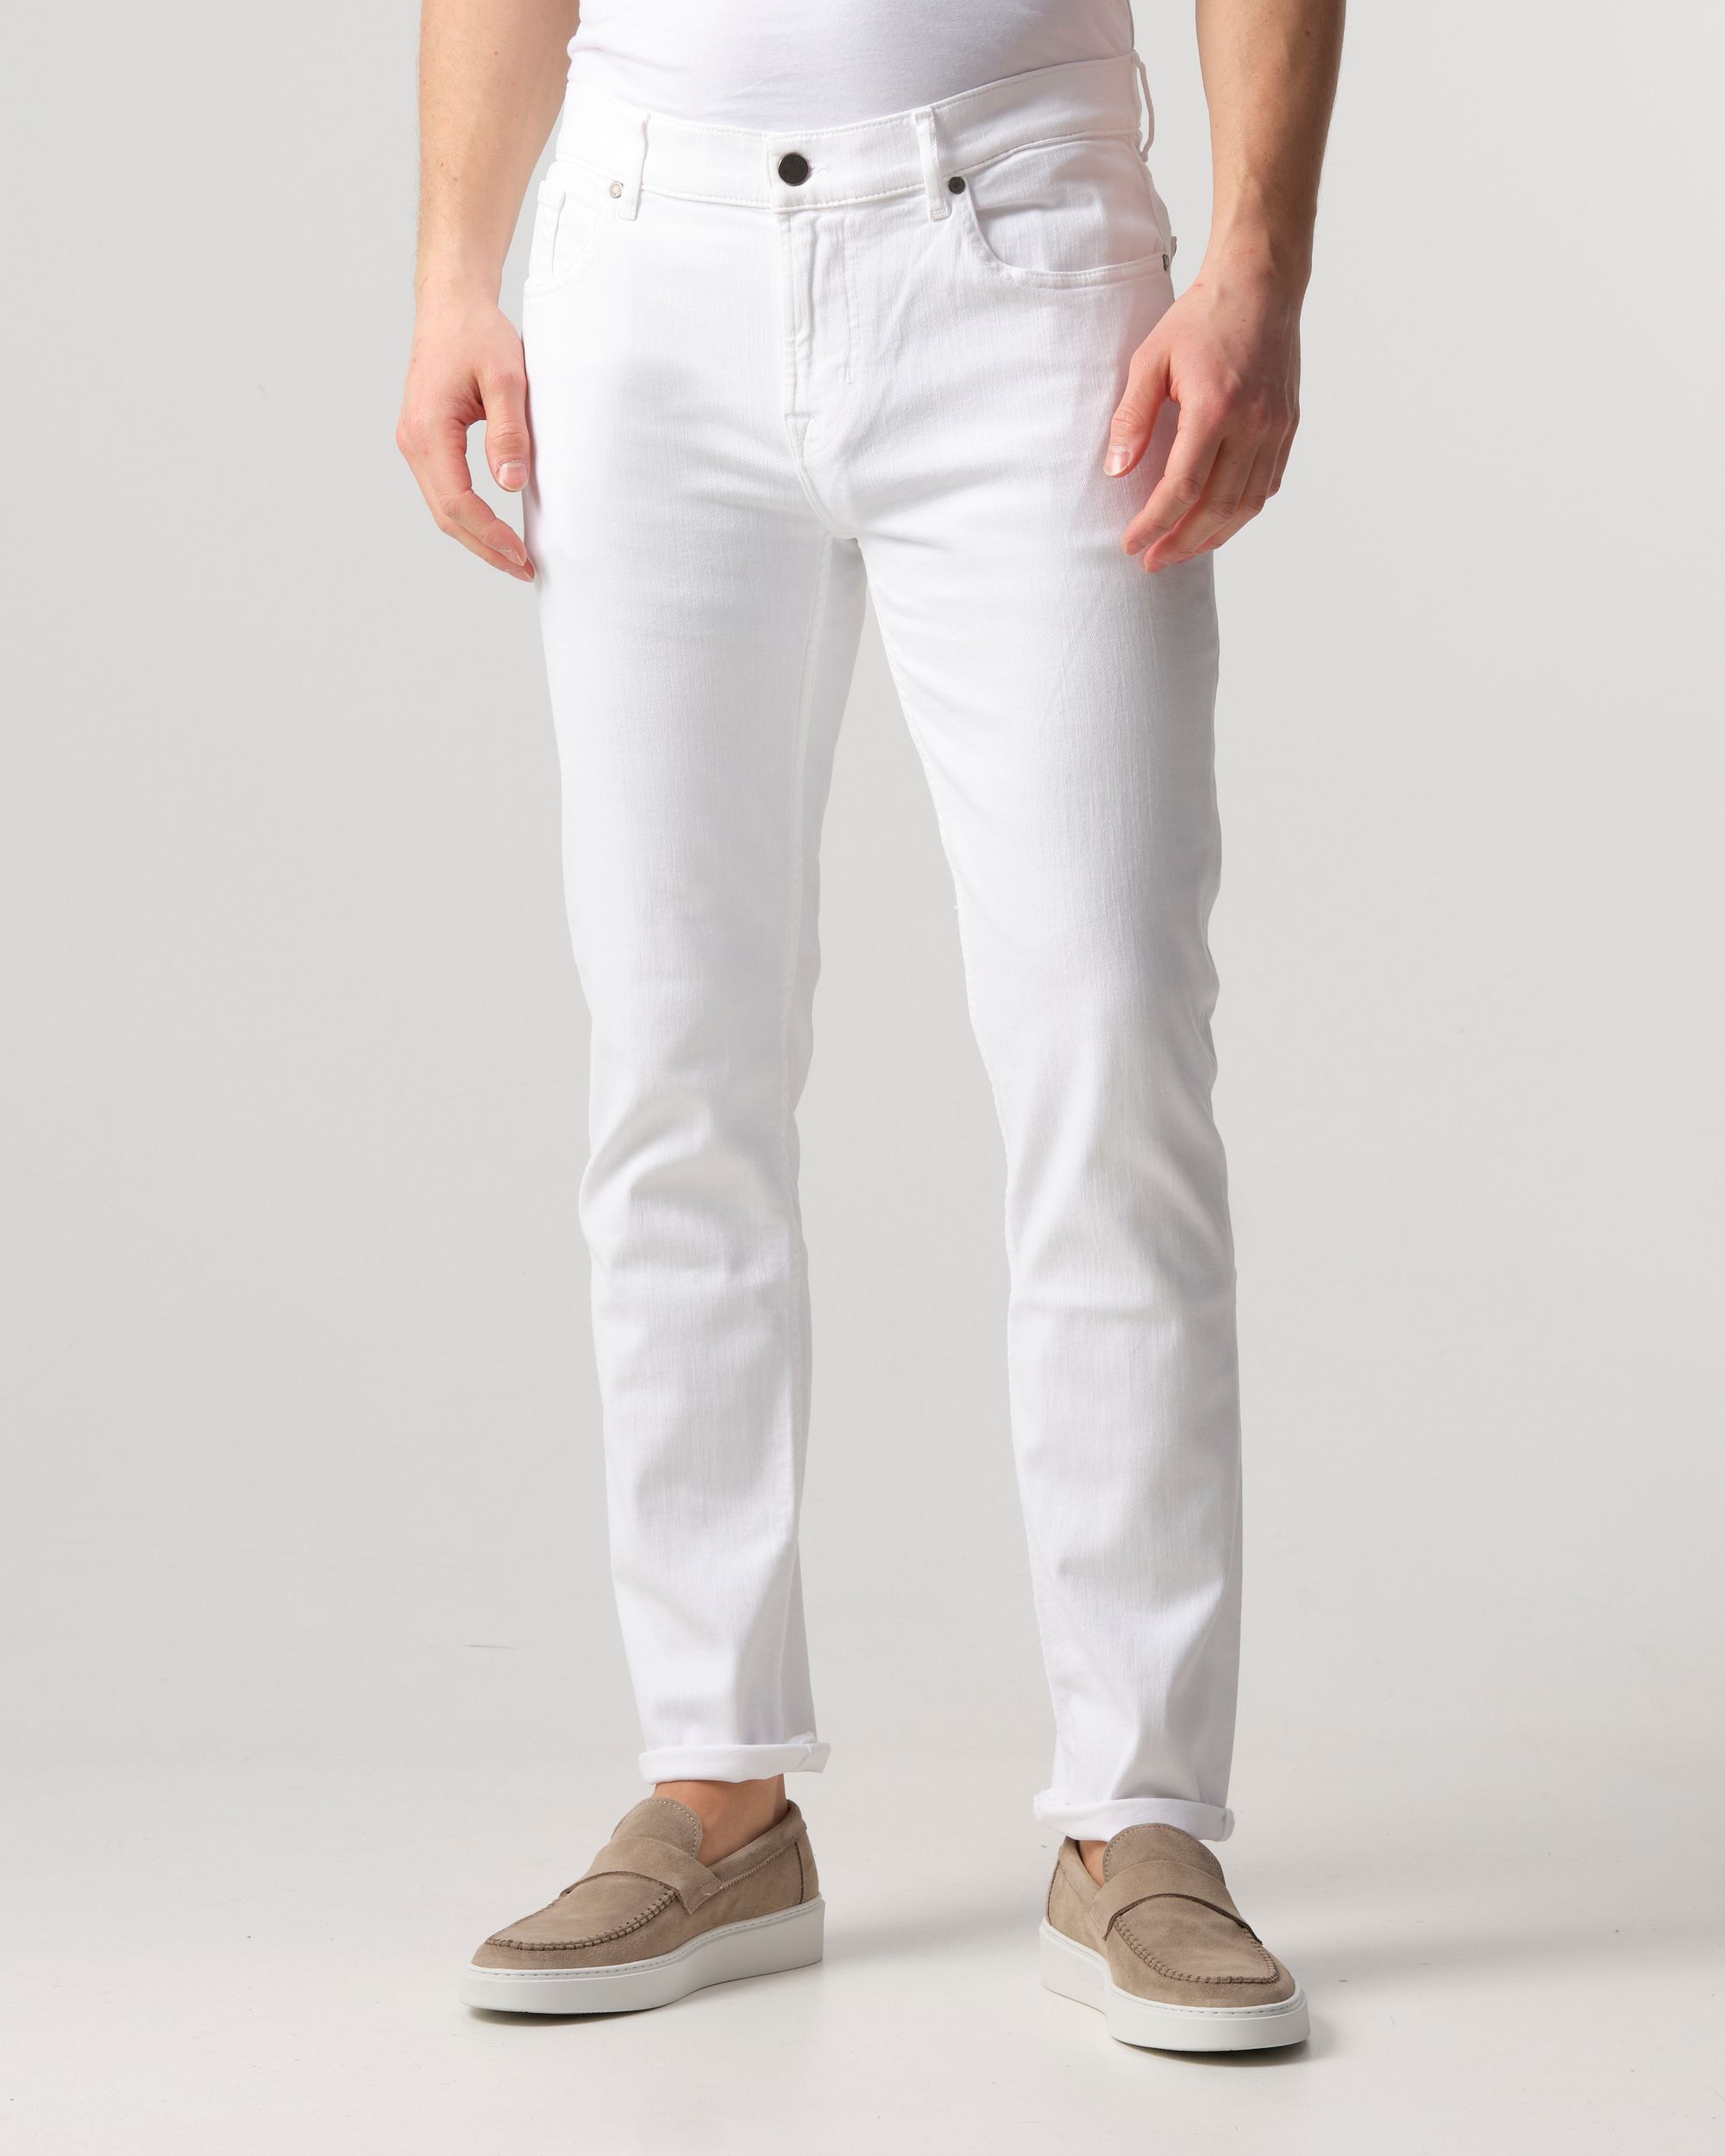 Seven for all mankind Slimmy Tapered Jeans Wit 094724-001-30